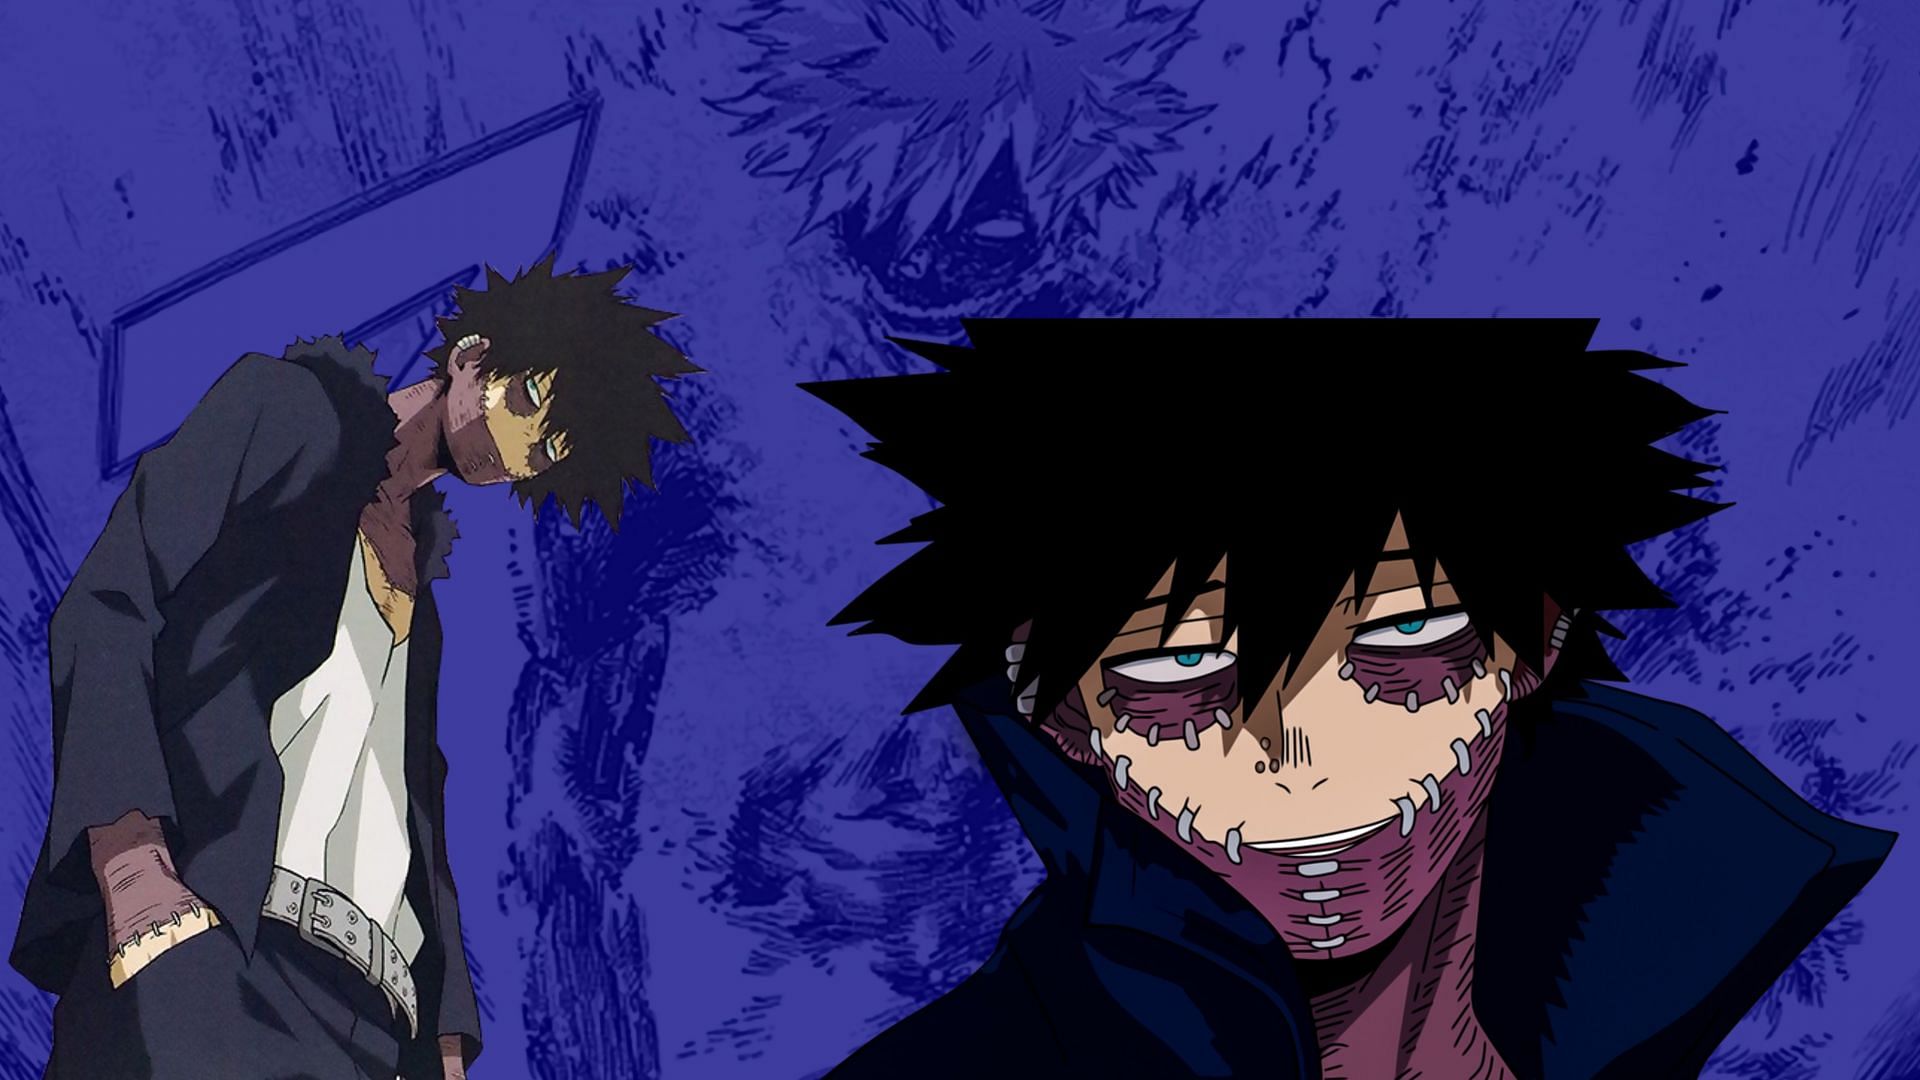 Dabi will forever remain as one of My Hero Academia